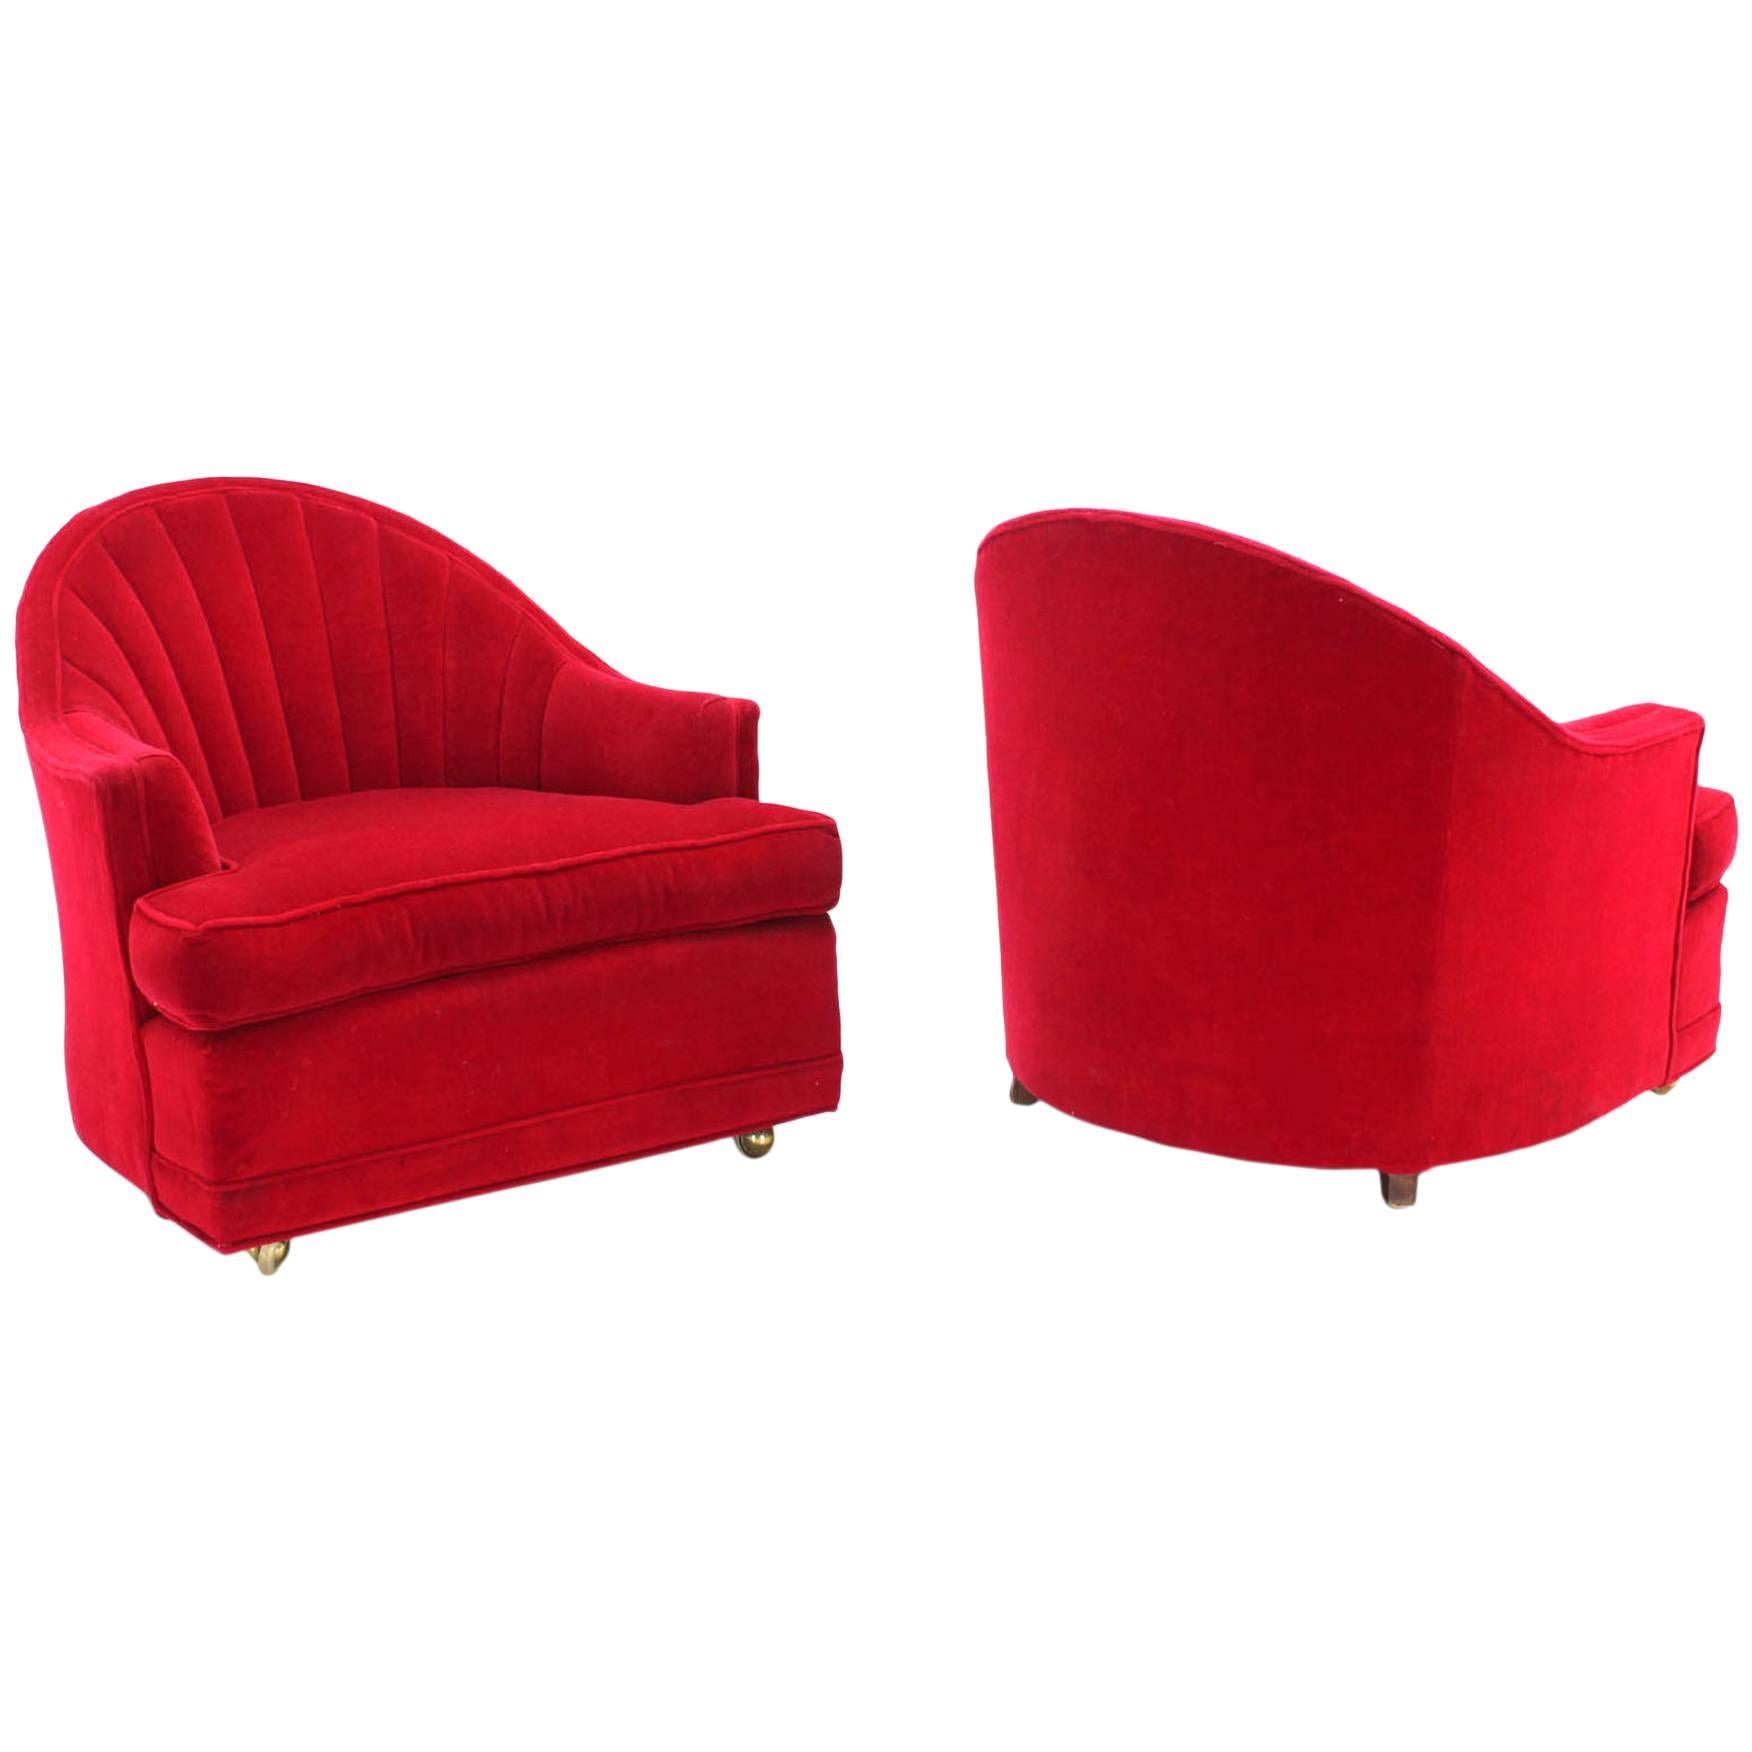 Pair of Red Upholstery Barrel Scallop Shape Back Lounge Chairs For Sale